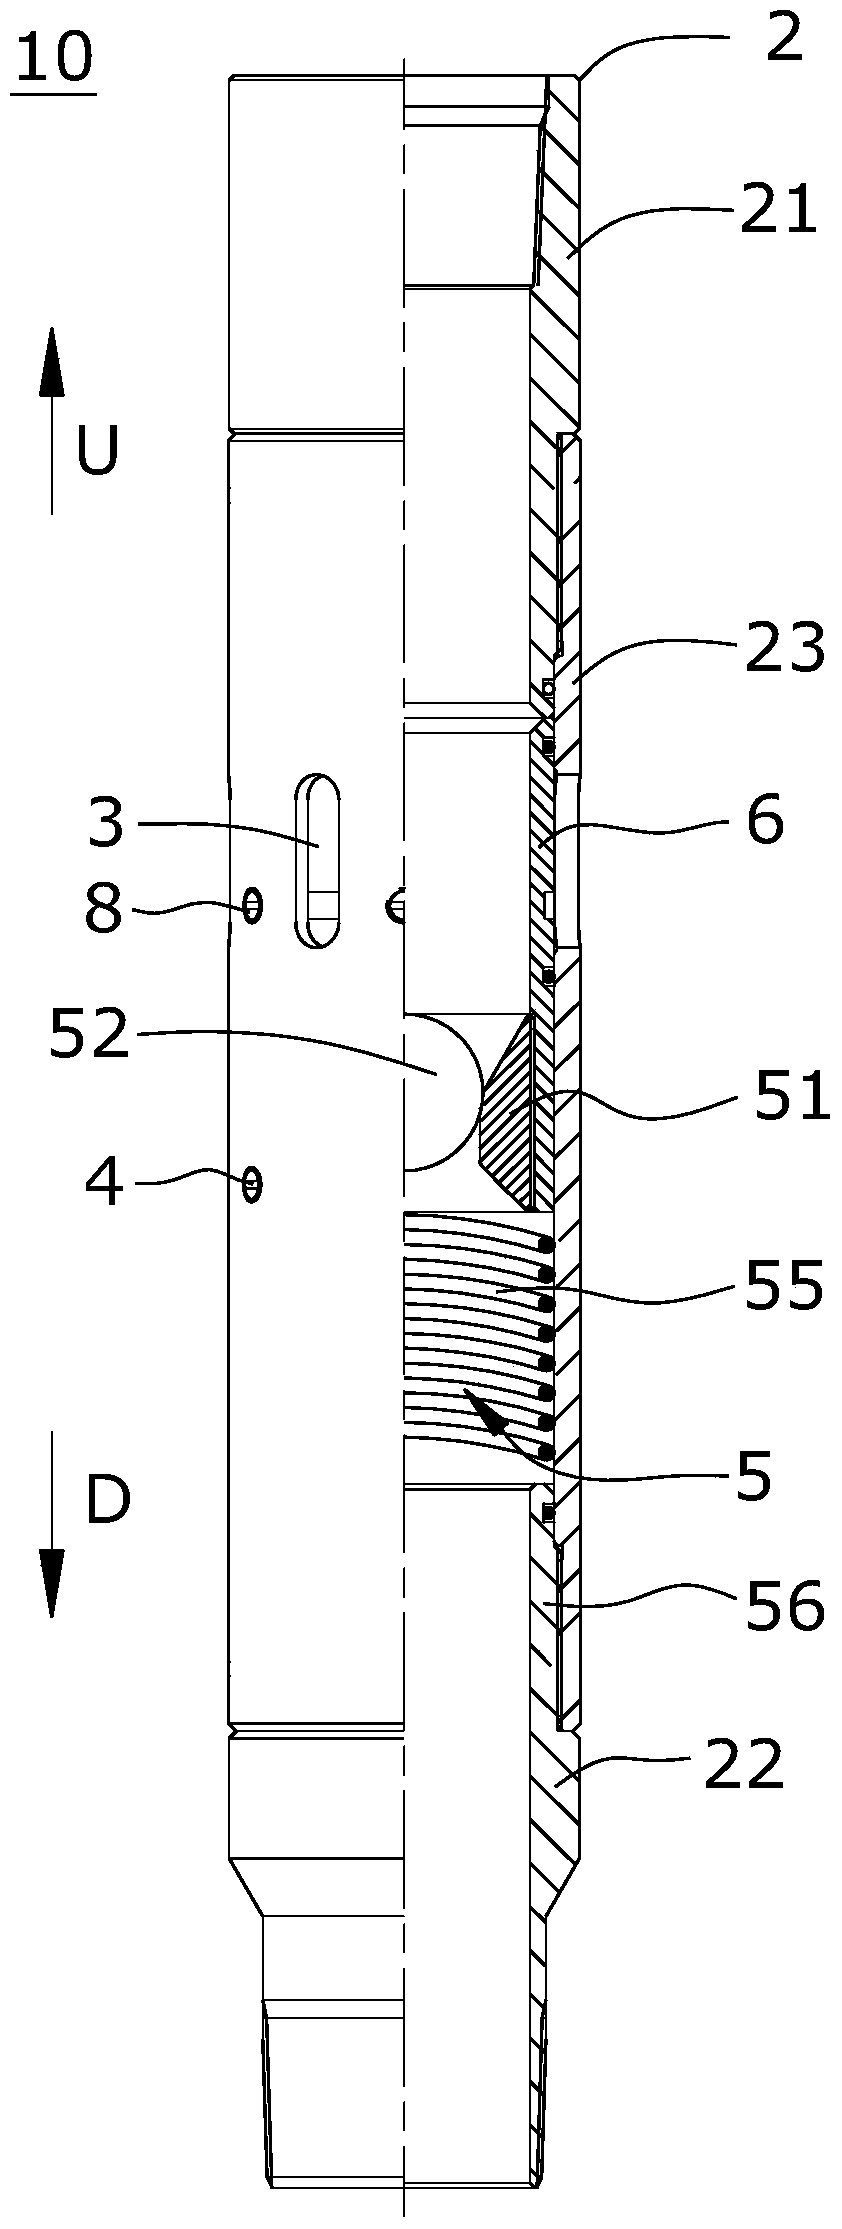 Fracturing devices used in tubing strings